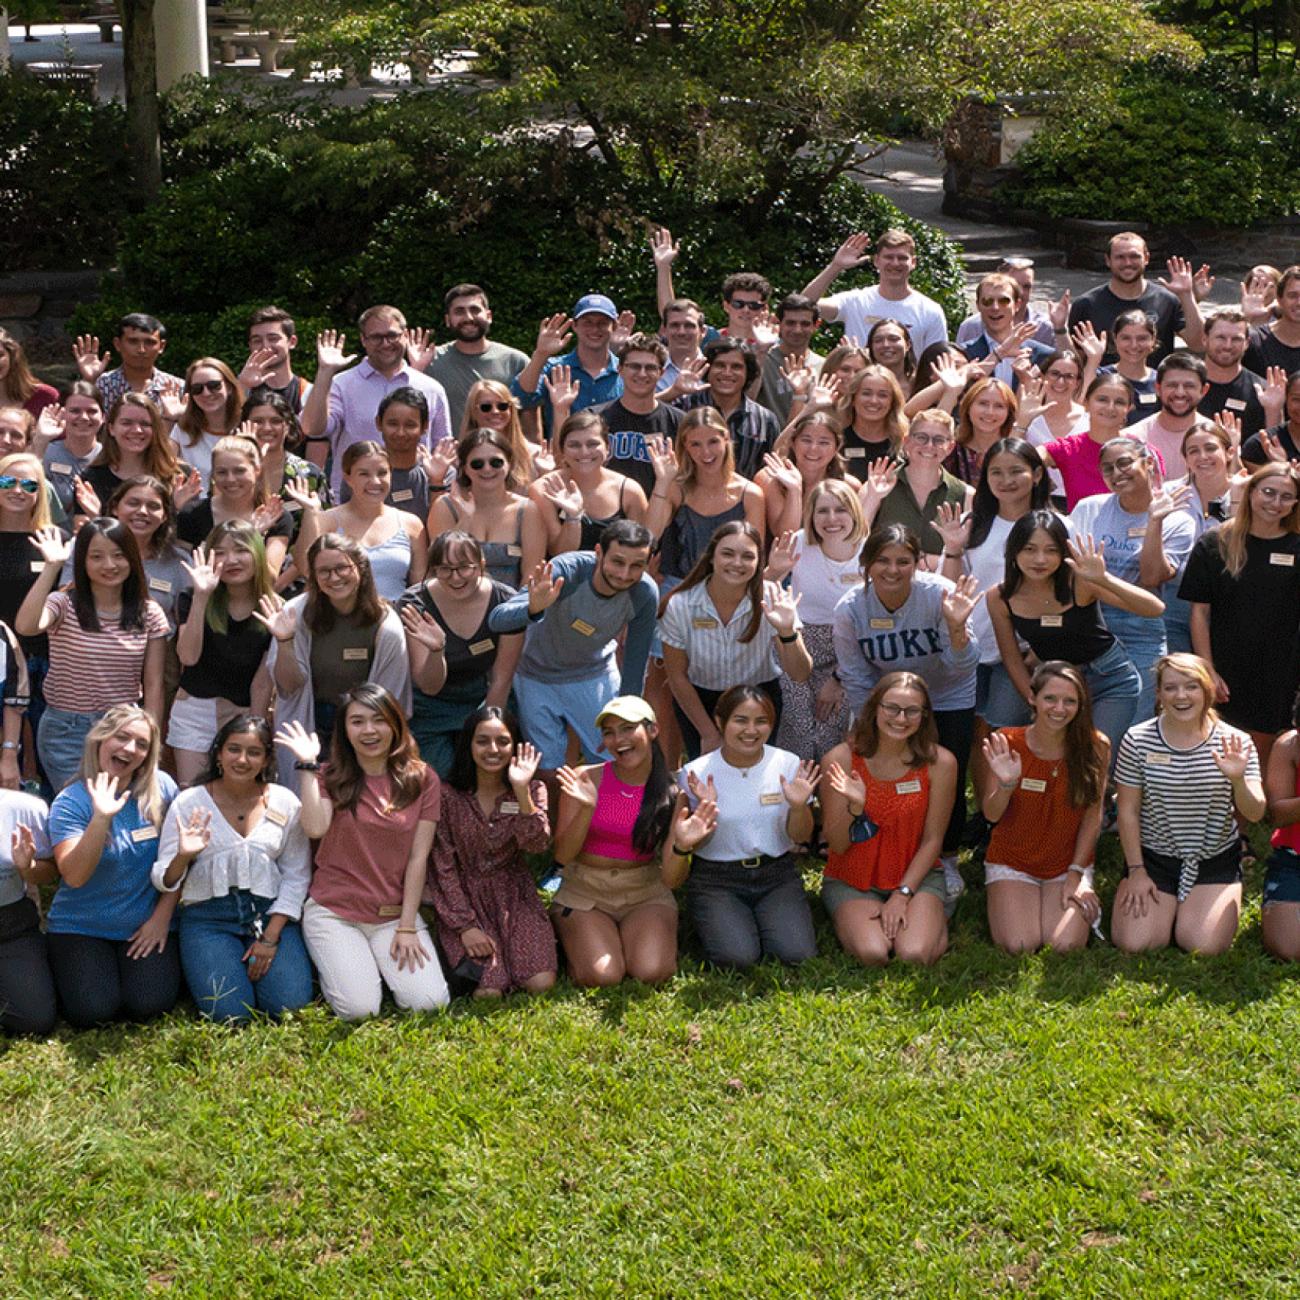 An outdoor photo of all the students, faculty and staff of the Nicholas School for the Environment gathered outside in the school's courtyard